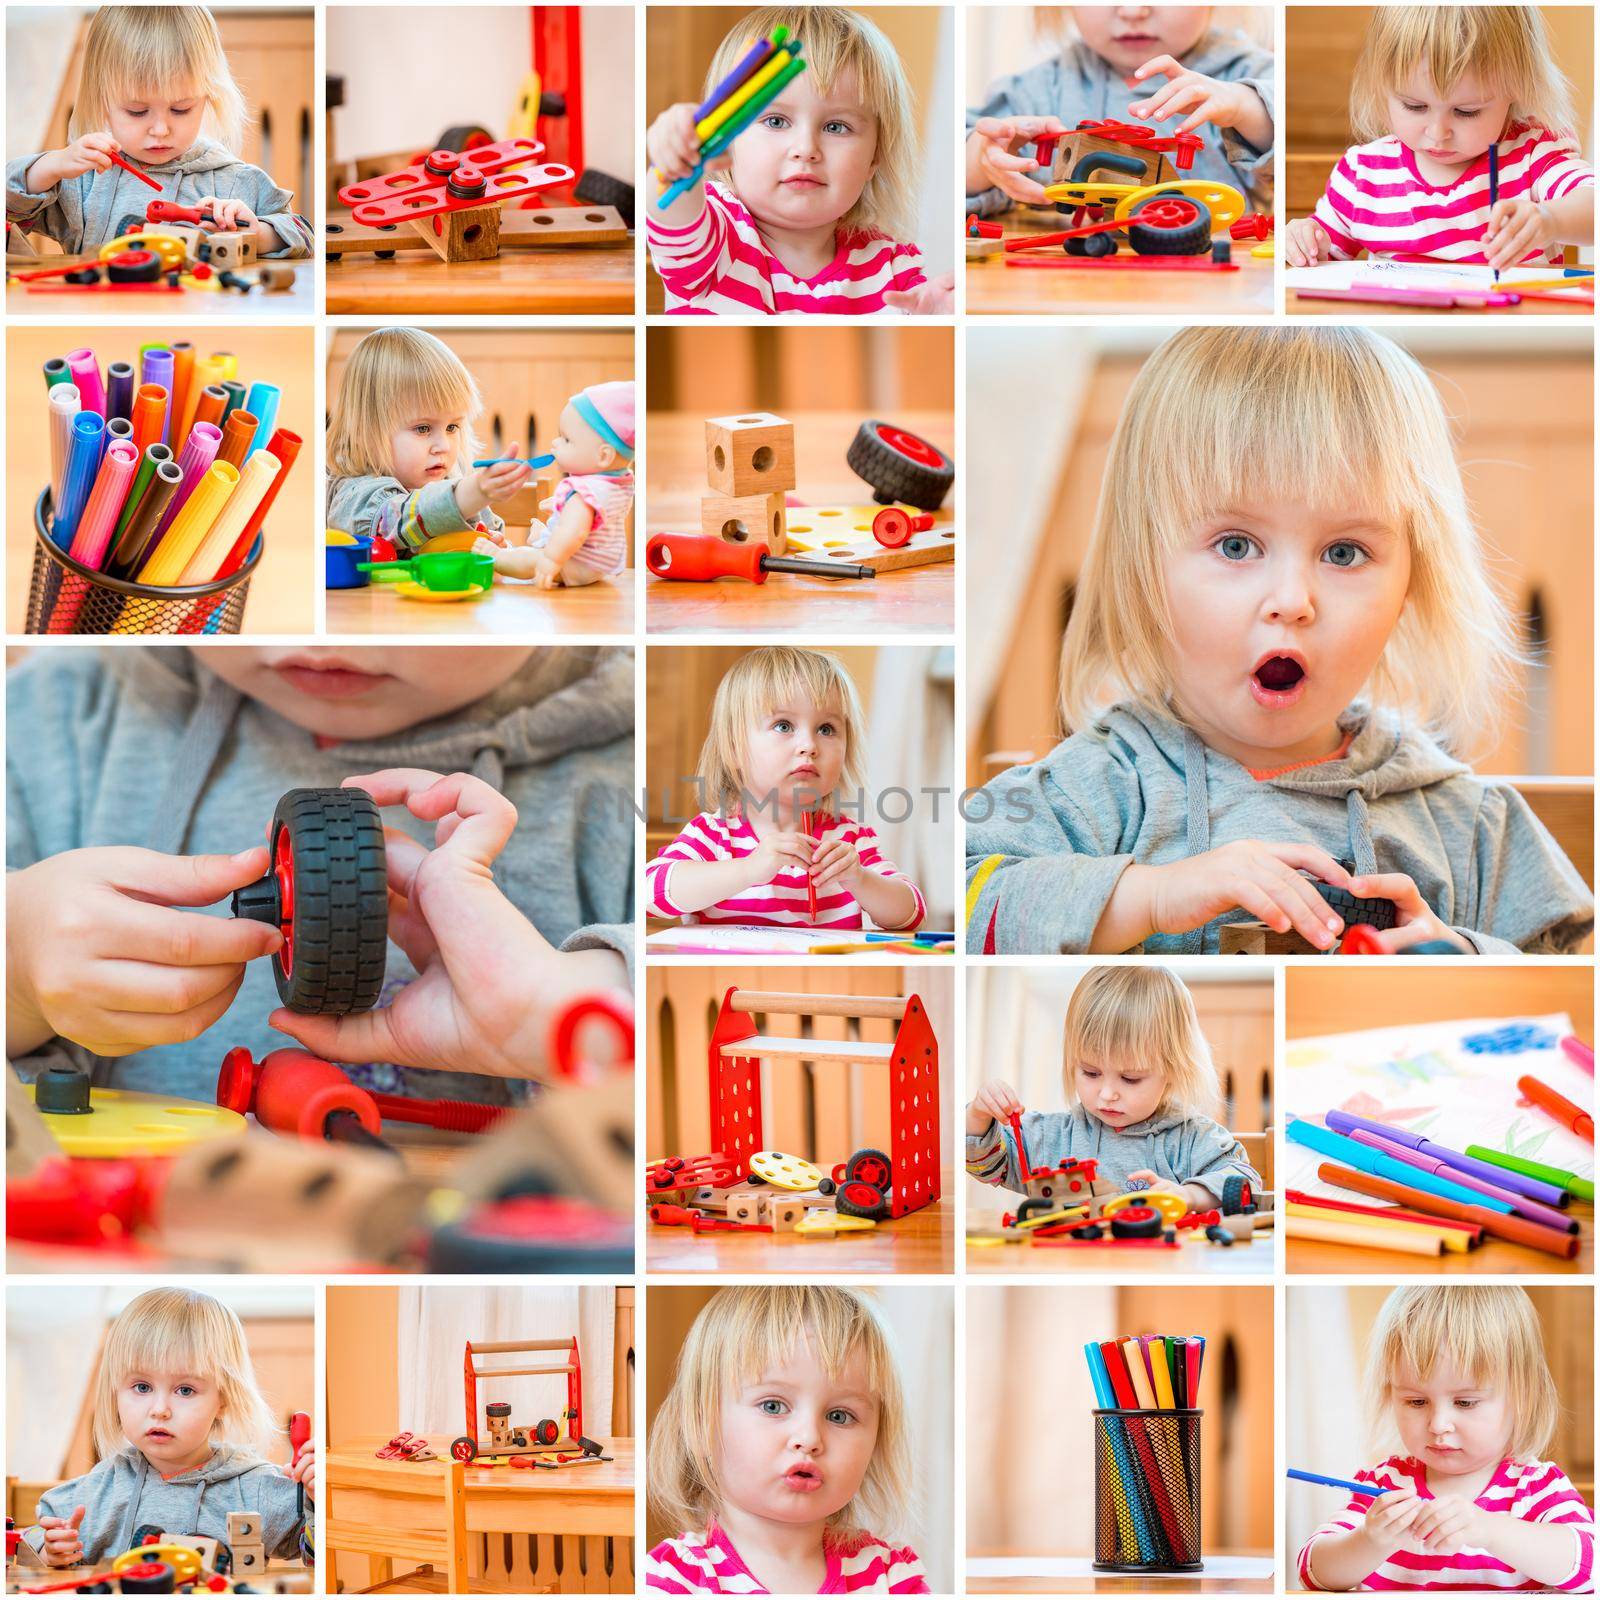 collage of photos of the little girl in the nursery